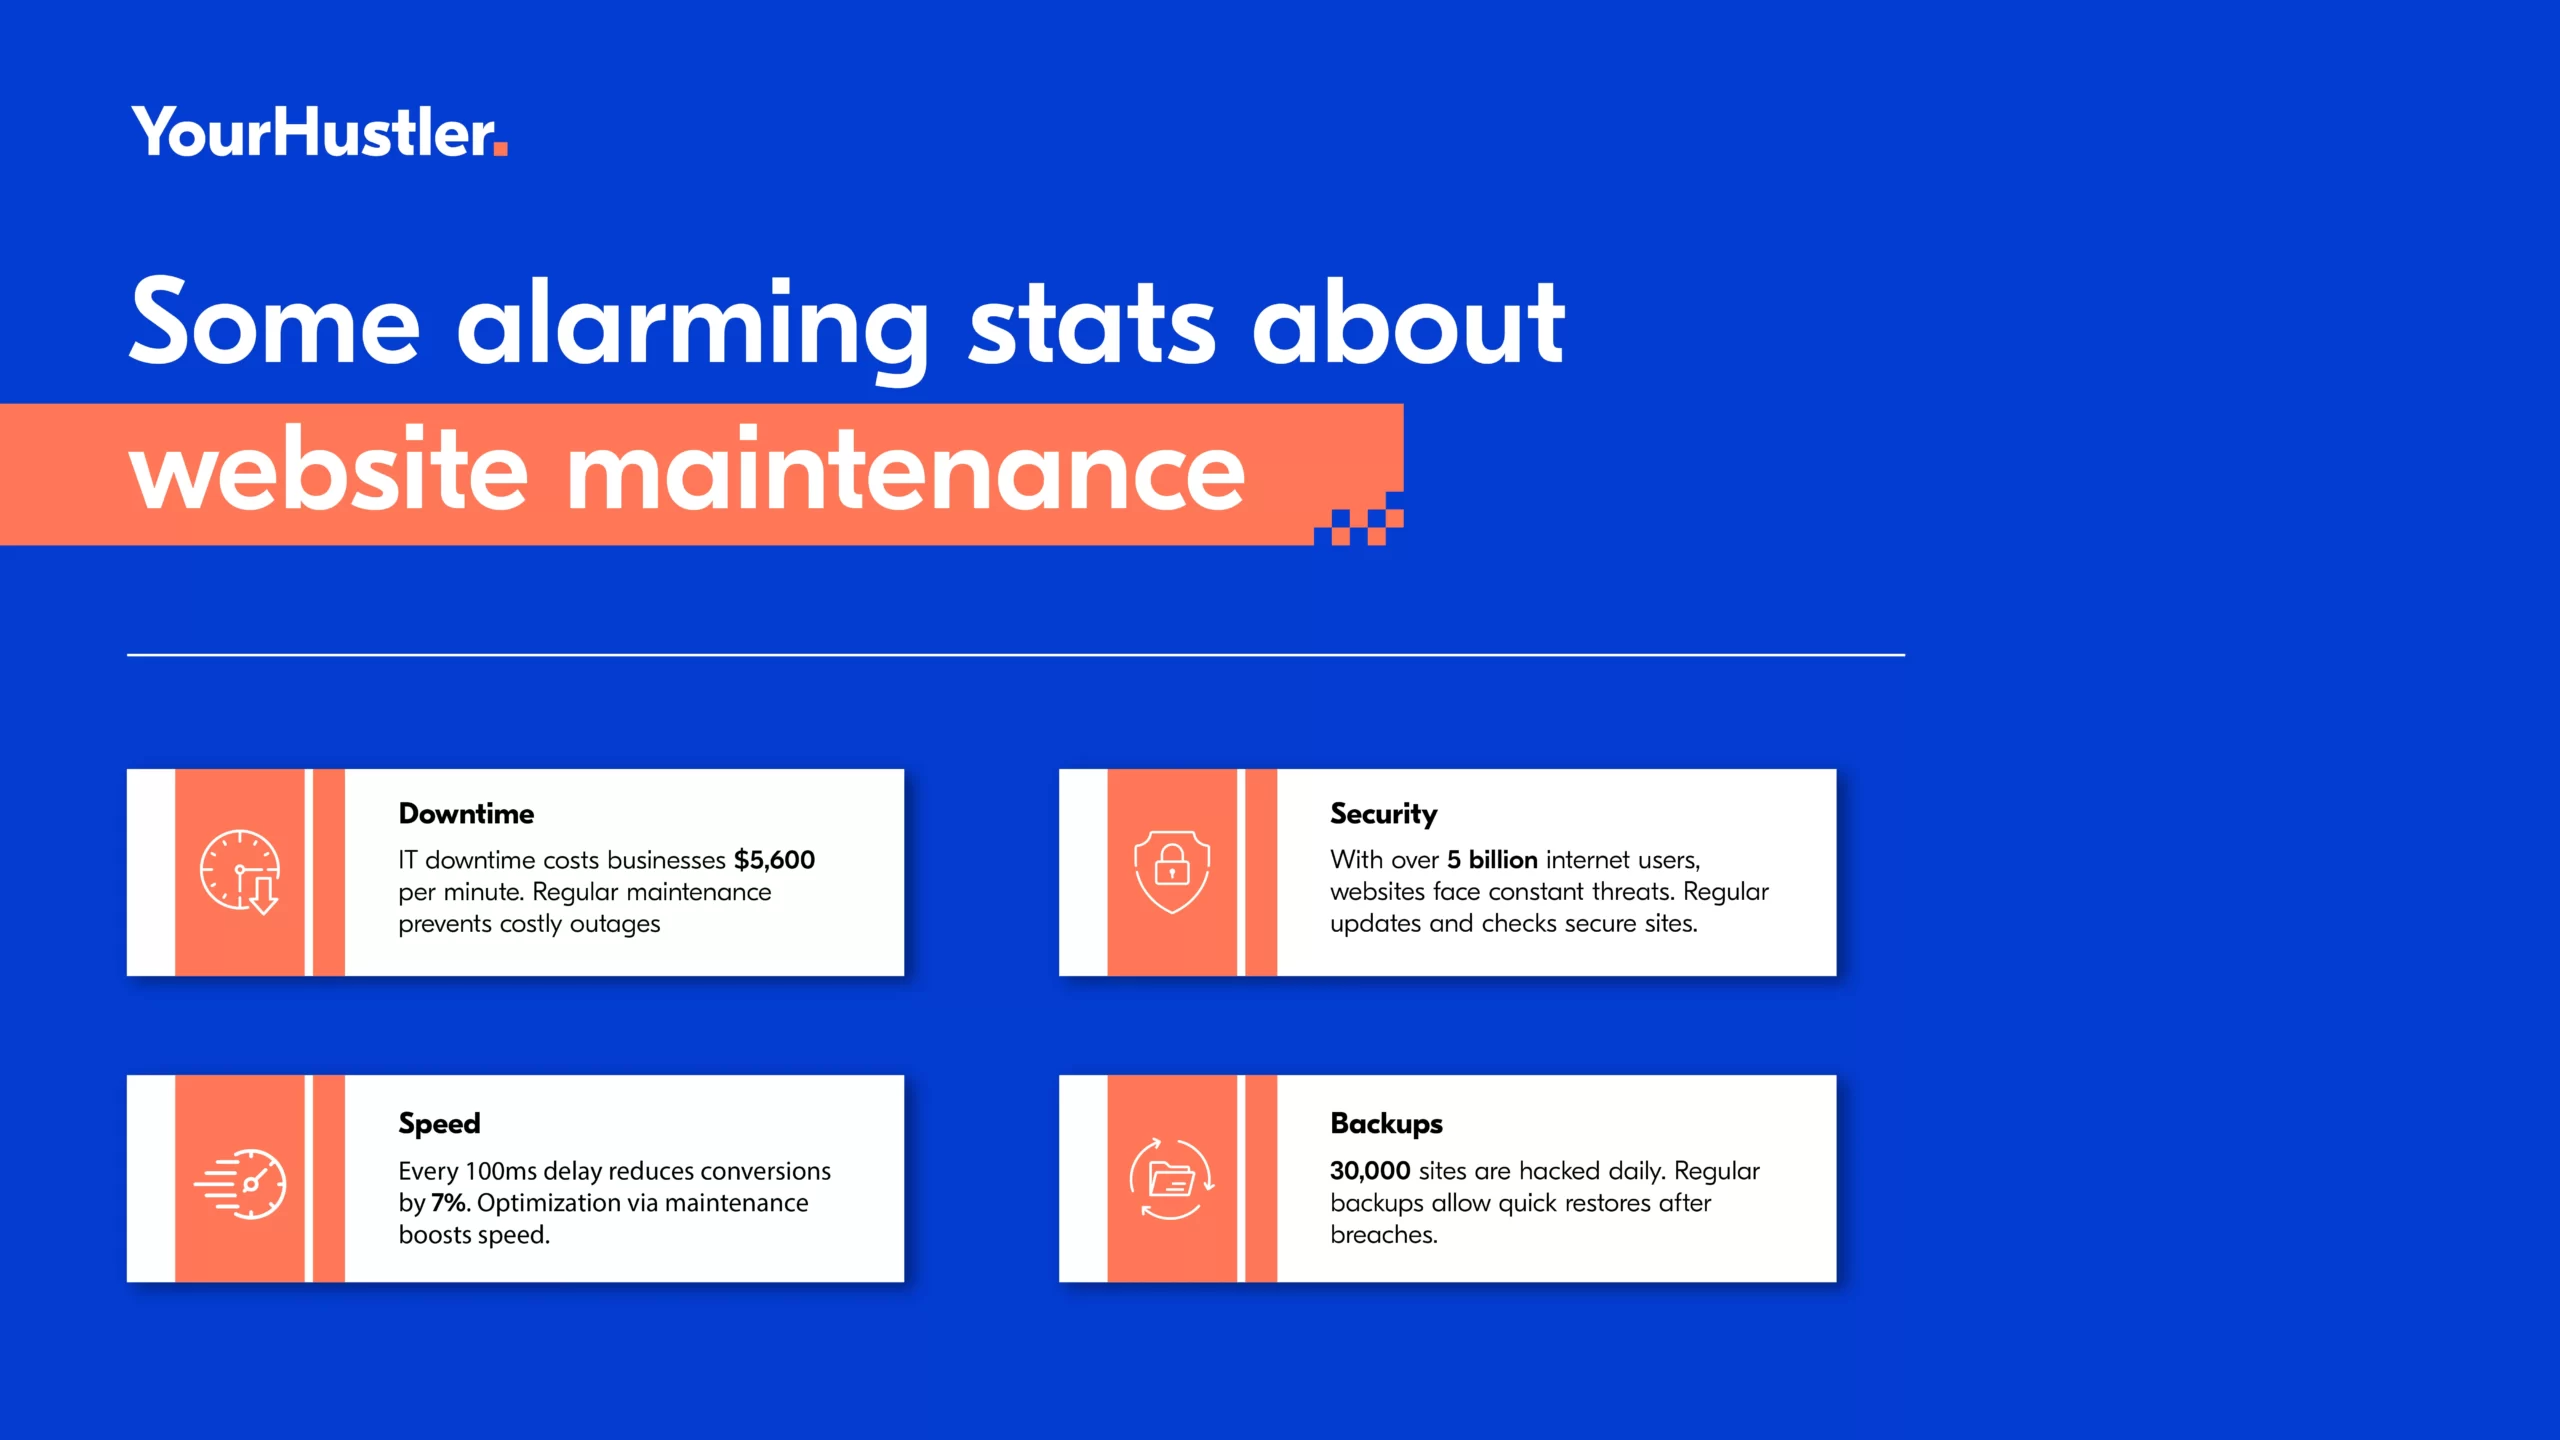 4 extremely important stats about website maintenance.